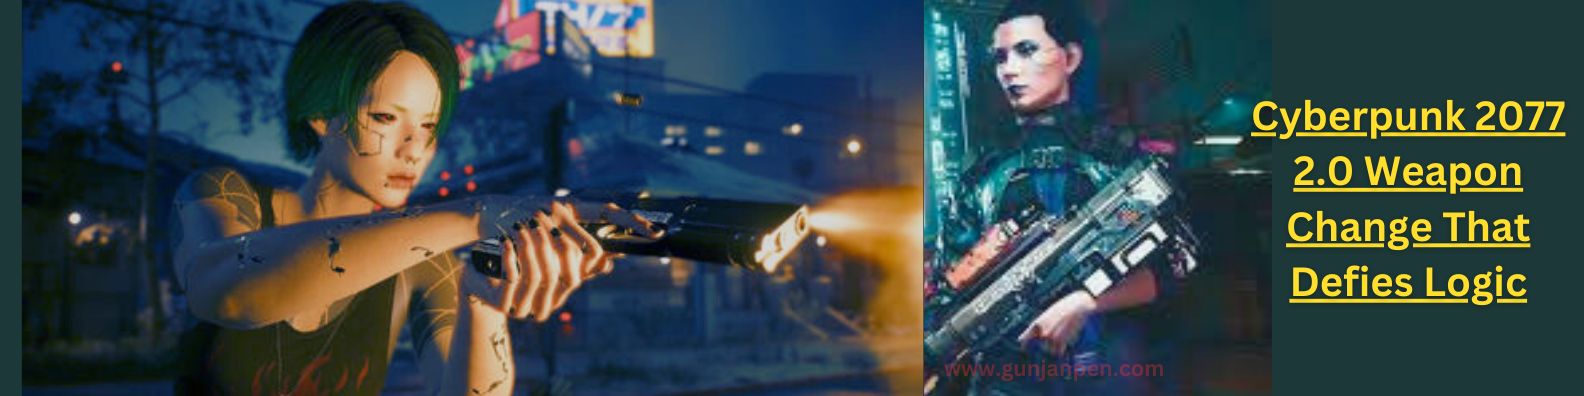 Analyzing the Unexplained: Cyberpunk 2077 2.0 Weapon Change That Defies Logic